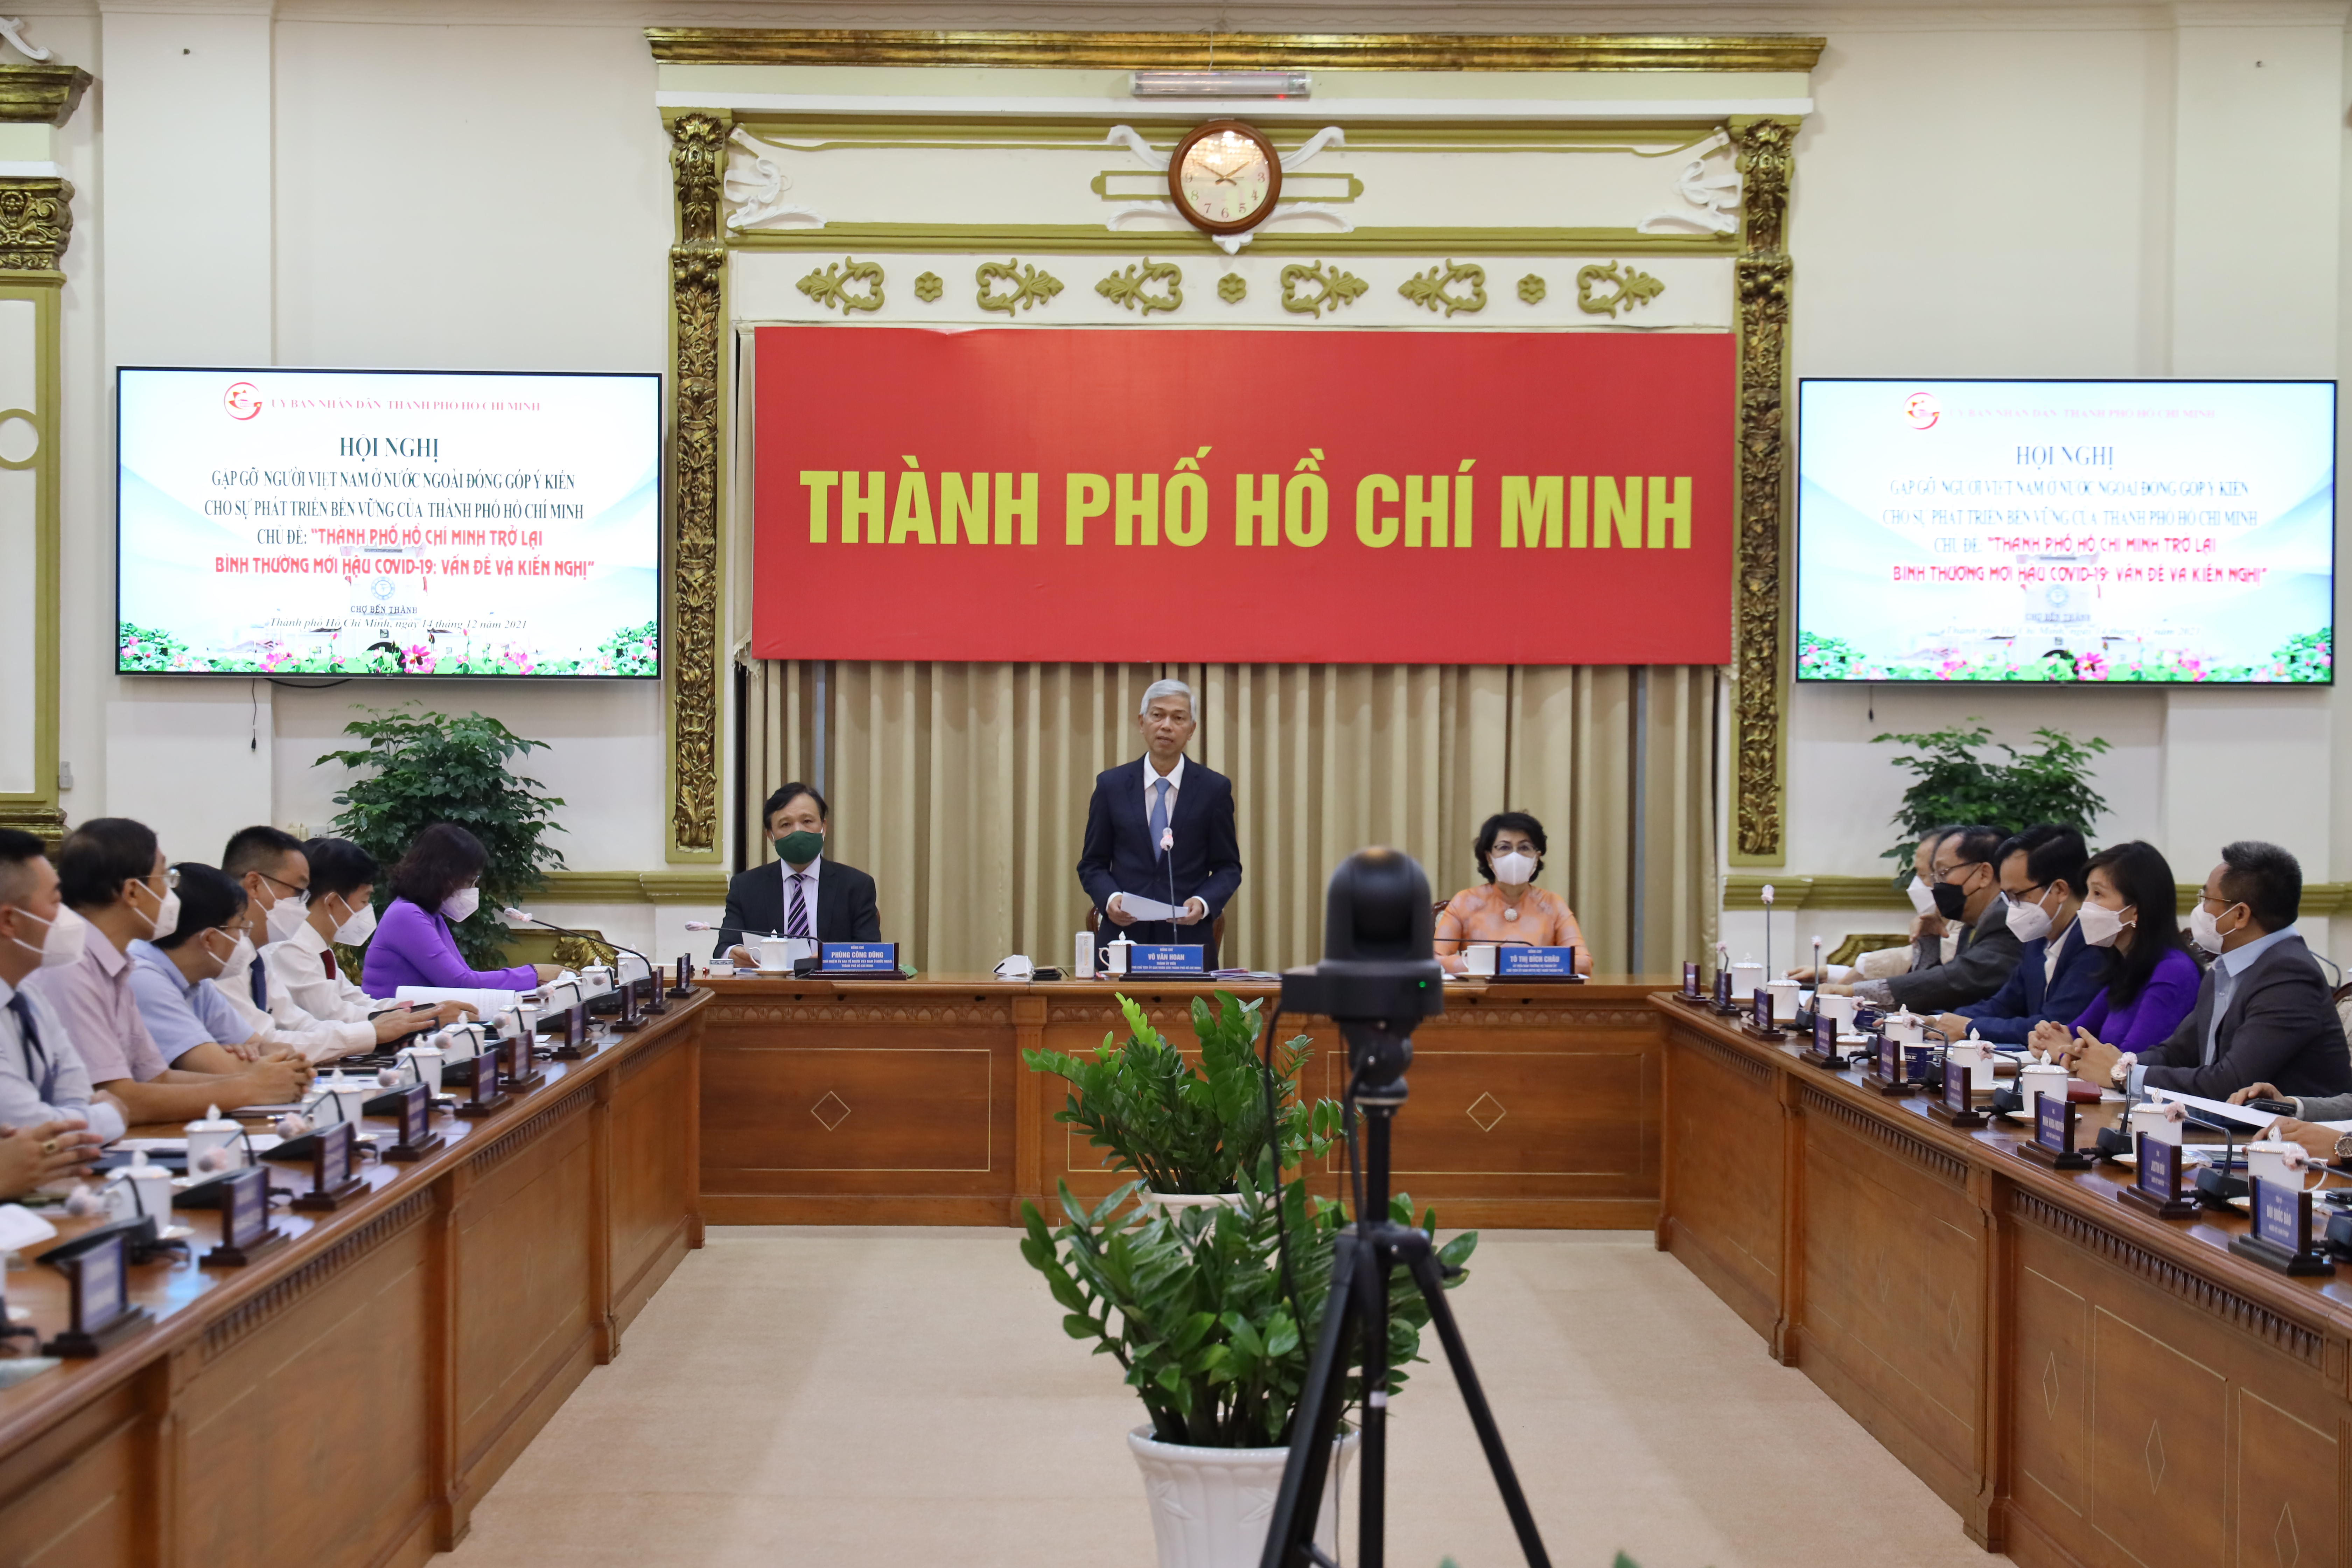 Discussion underway for production of Molnupiravir in Ho Chi Minh City: diplomat